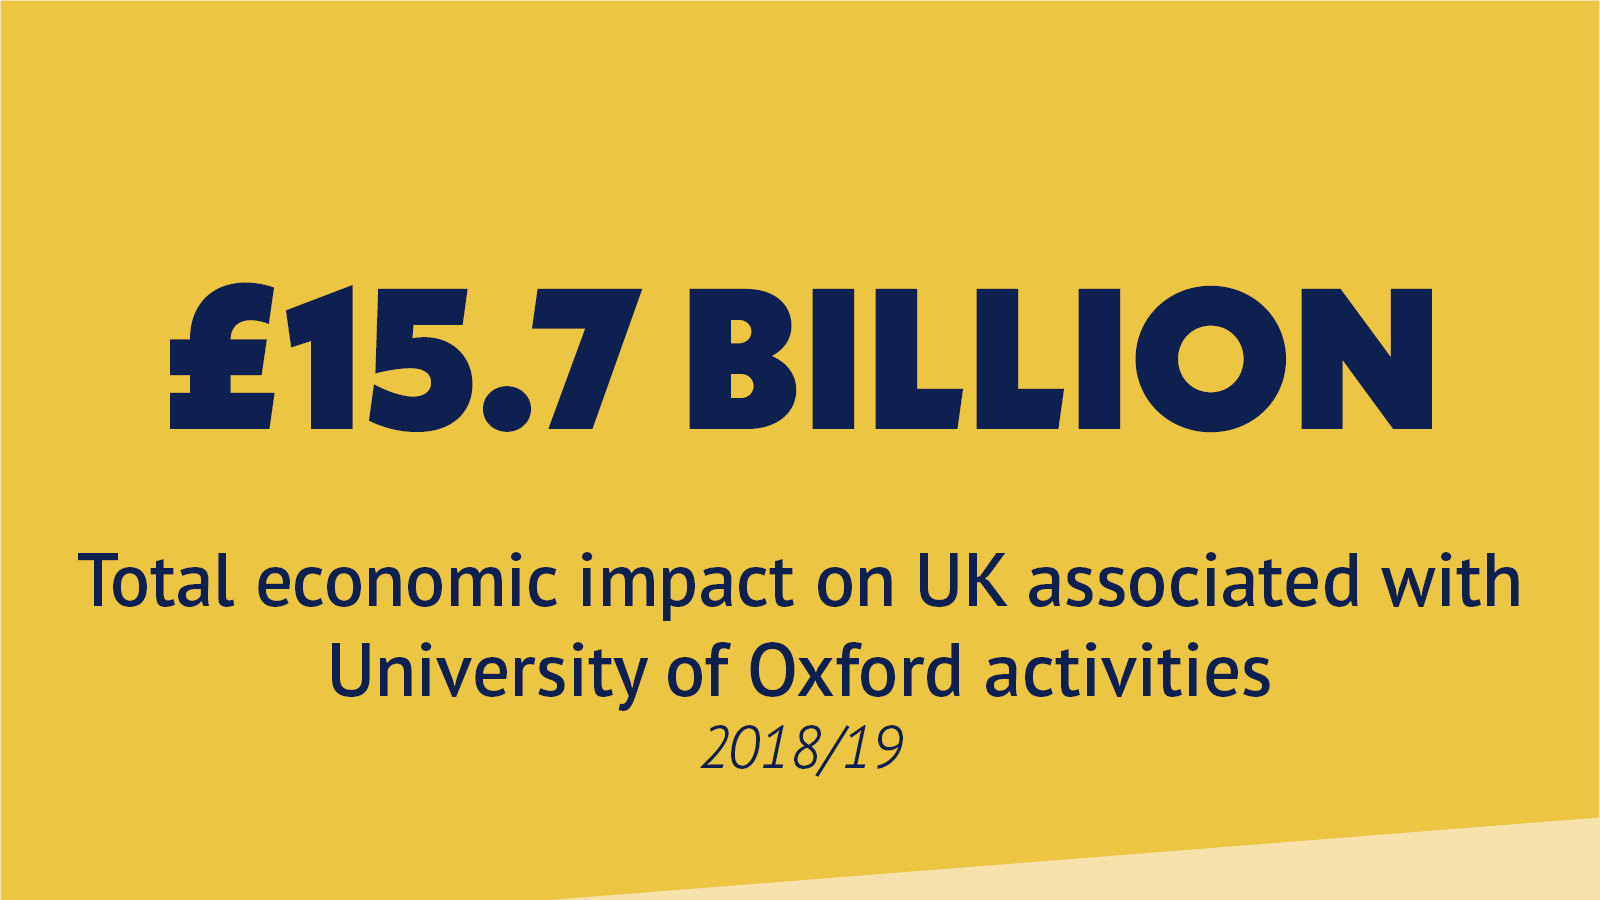 £15.7 billion total economic impact on UK associated with University of Oxford activities 2018/19